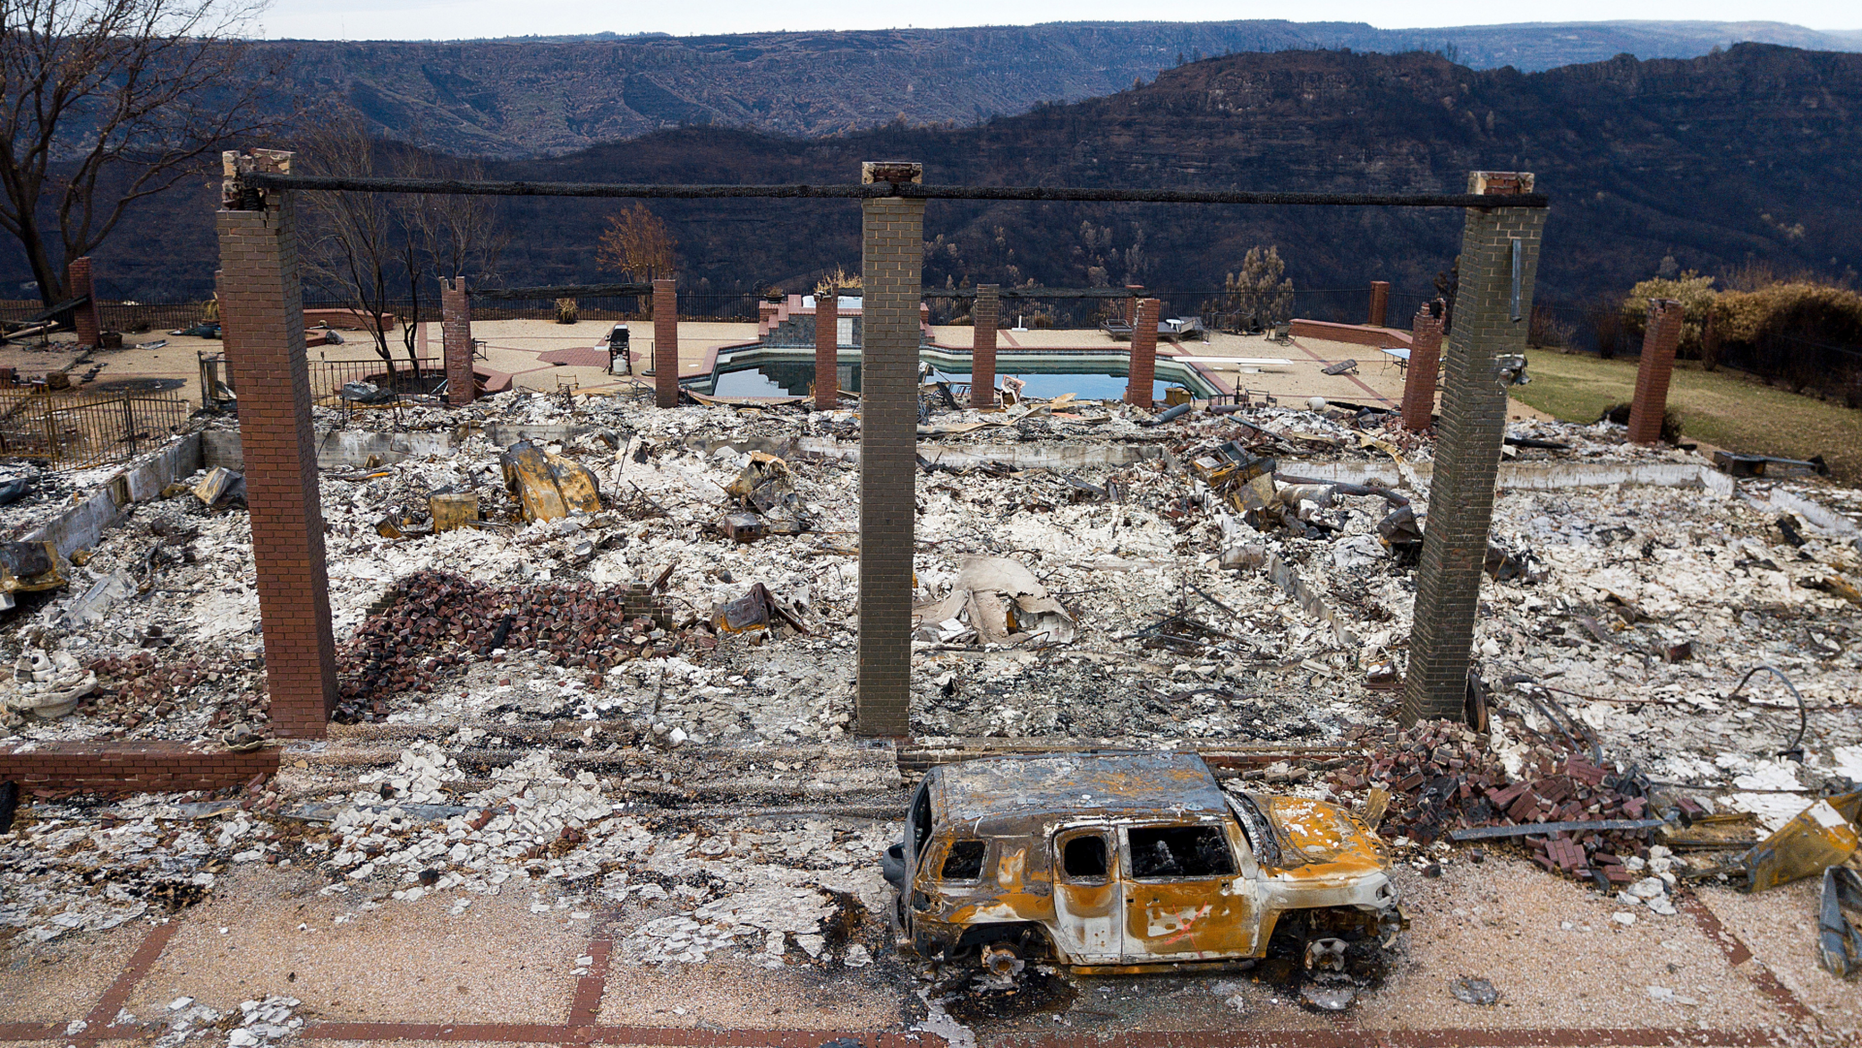 DOSSIER - In this archival photo of December 3, 2018, a vehicle sits in front of a house leveled by Camp Fire in Paradise, California, Pacific Gas & amp; Electric says its equipment could have lit the 2018 campfire, which killed 86 people and destroyed an entire city in northern California. The troubled utility reported Thursday, February 28, 2019, that it had a charge of $ 10.5 billion for firefighting claims in its fourth quarter results. (AP Photo / Noah Berger, File)